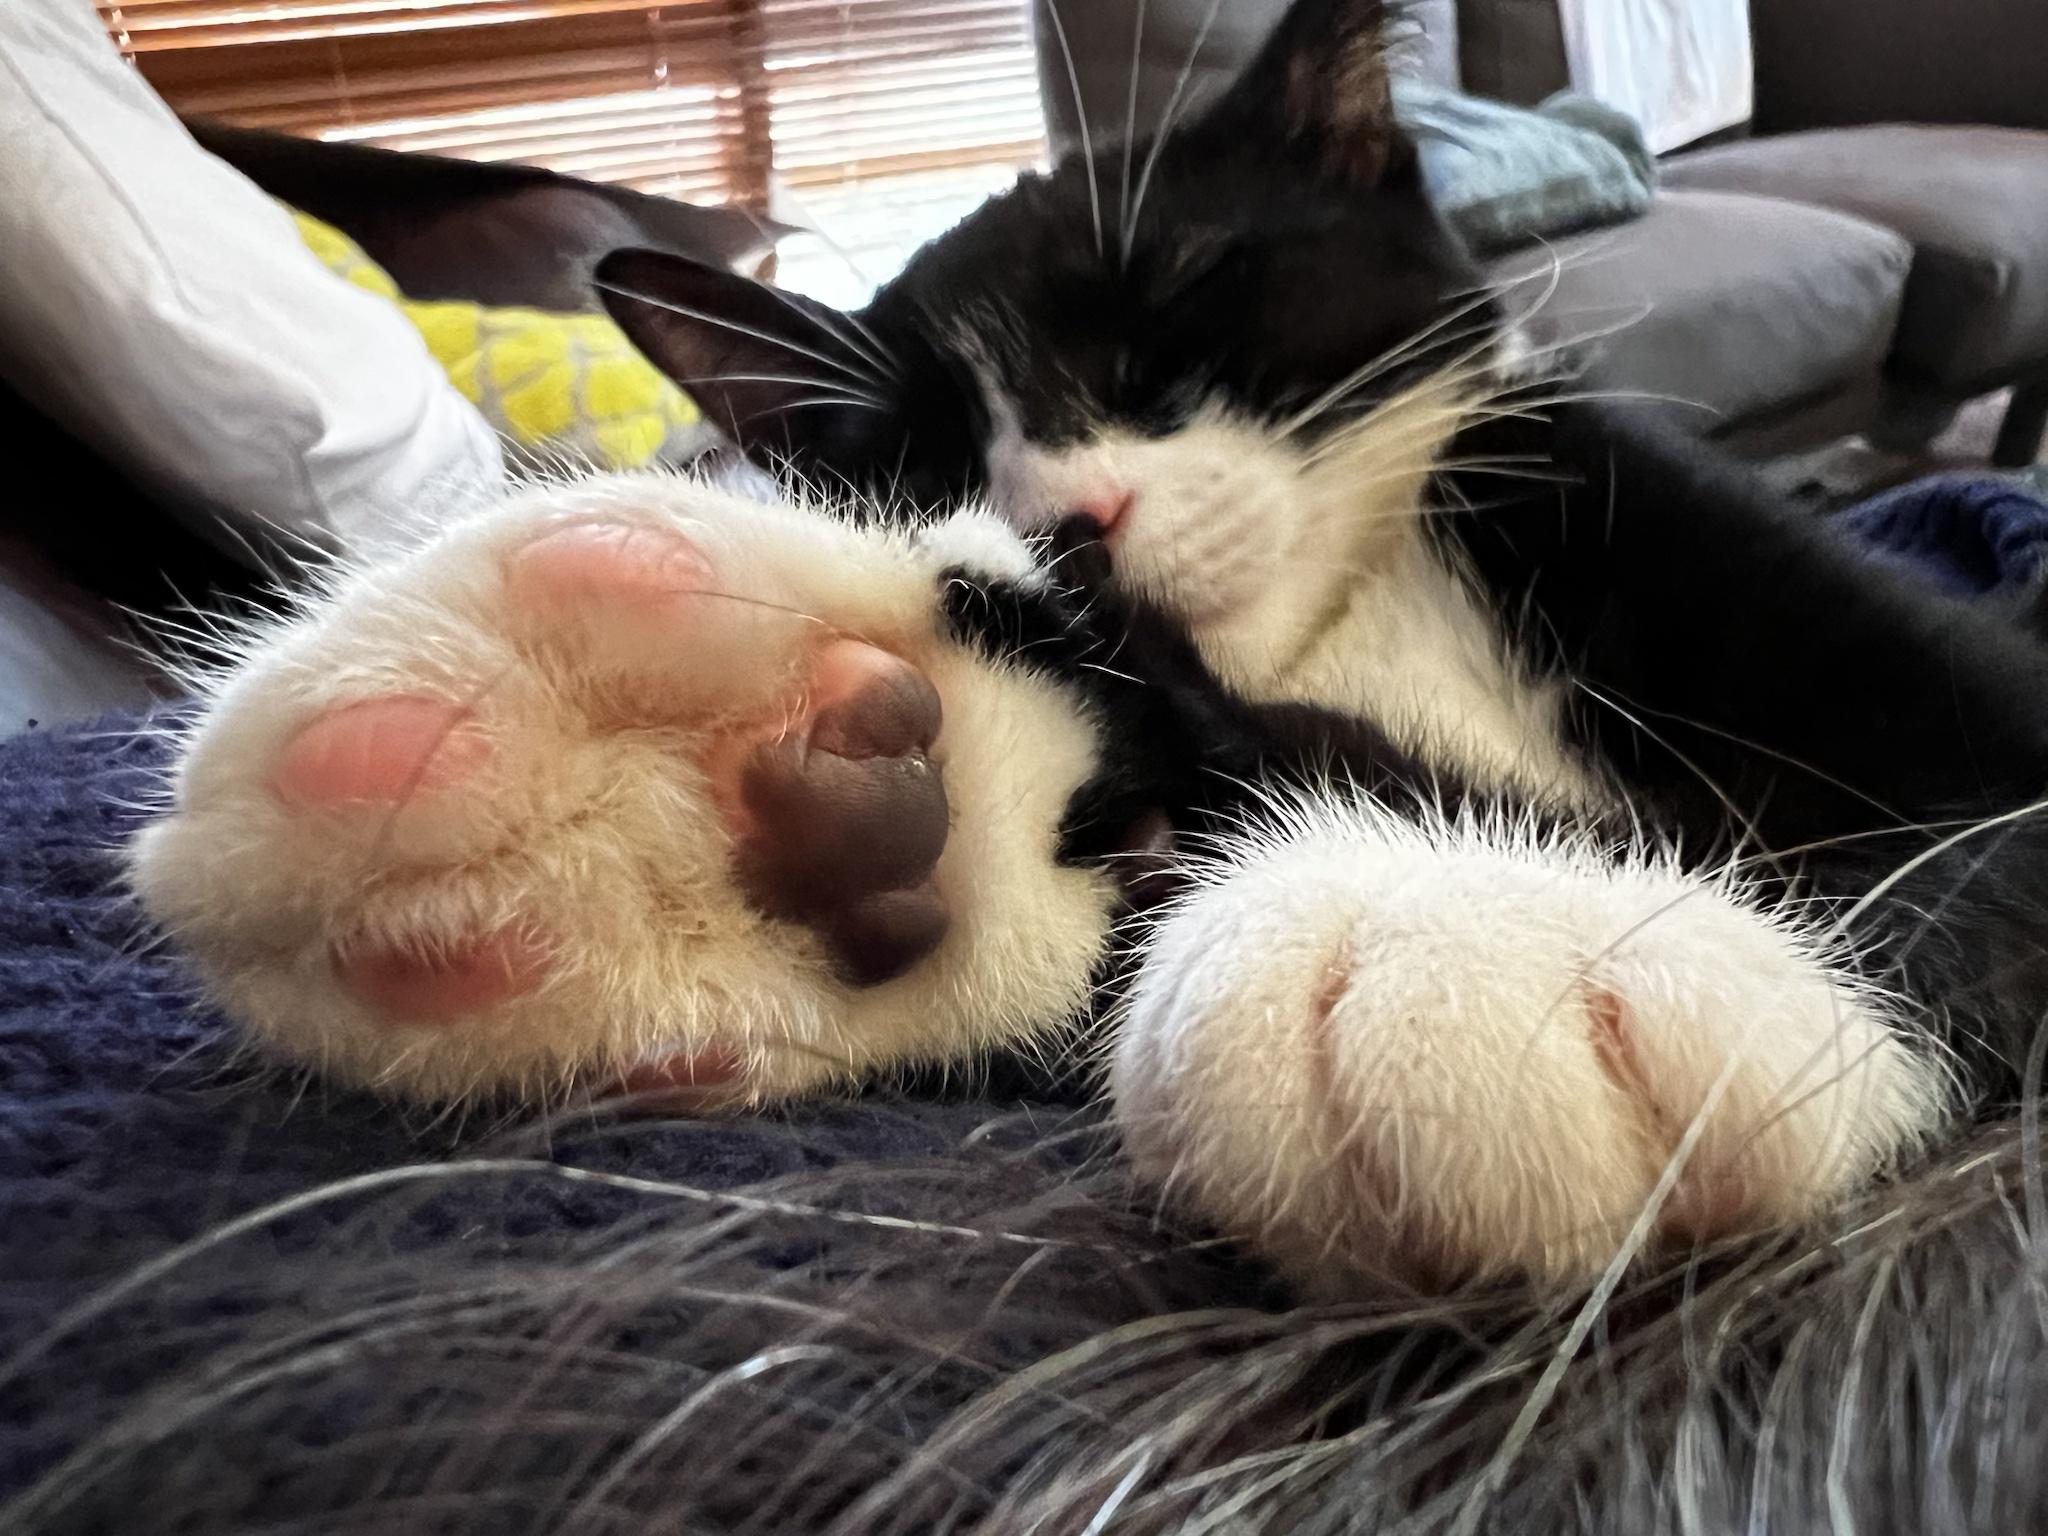 As is extinct I expose toe beans of m my contemporary cat Varda